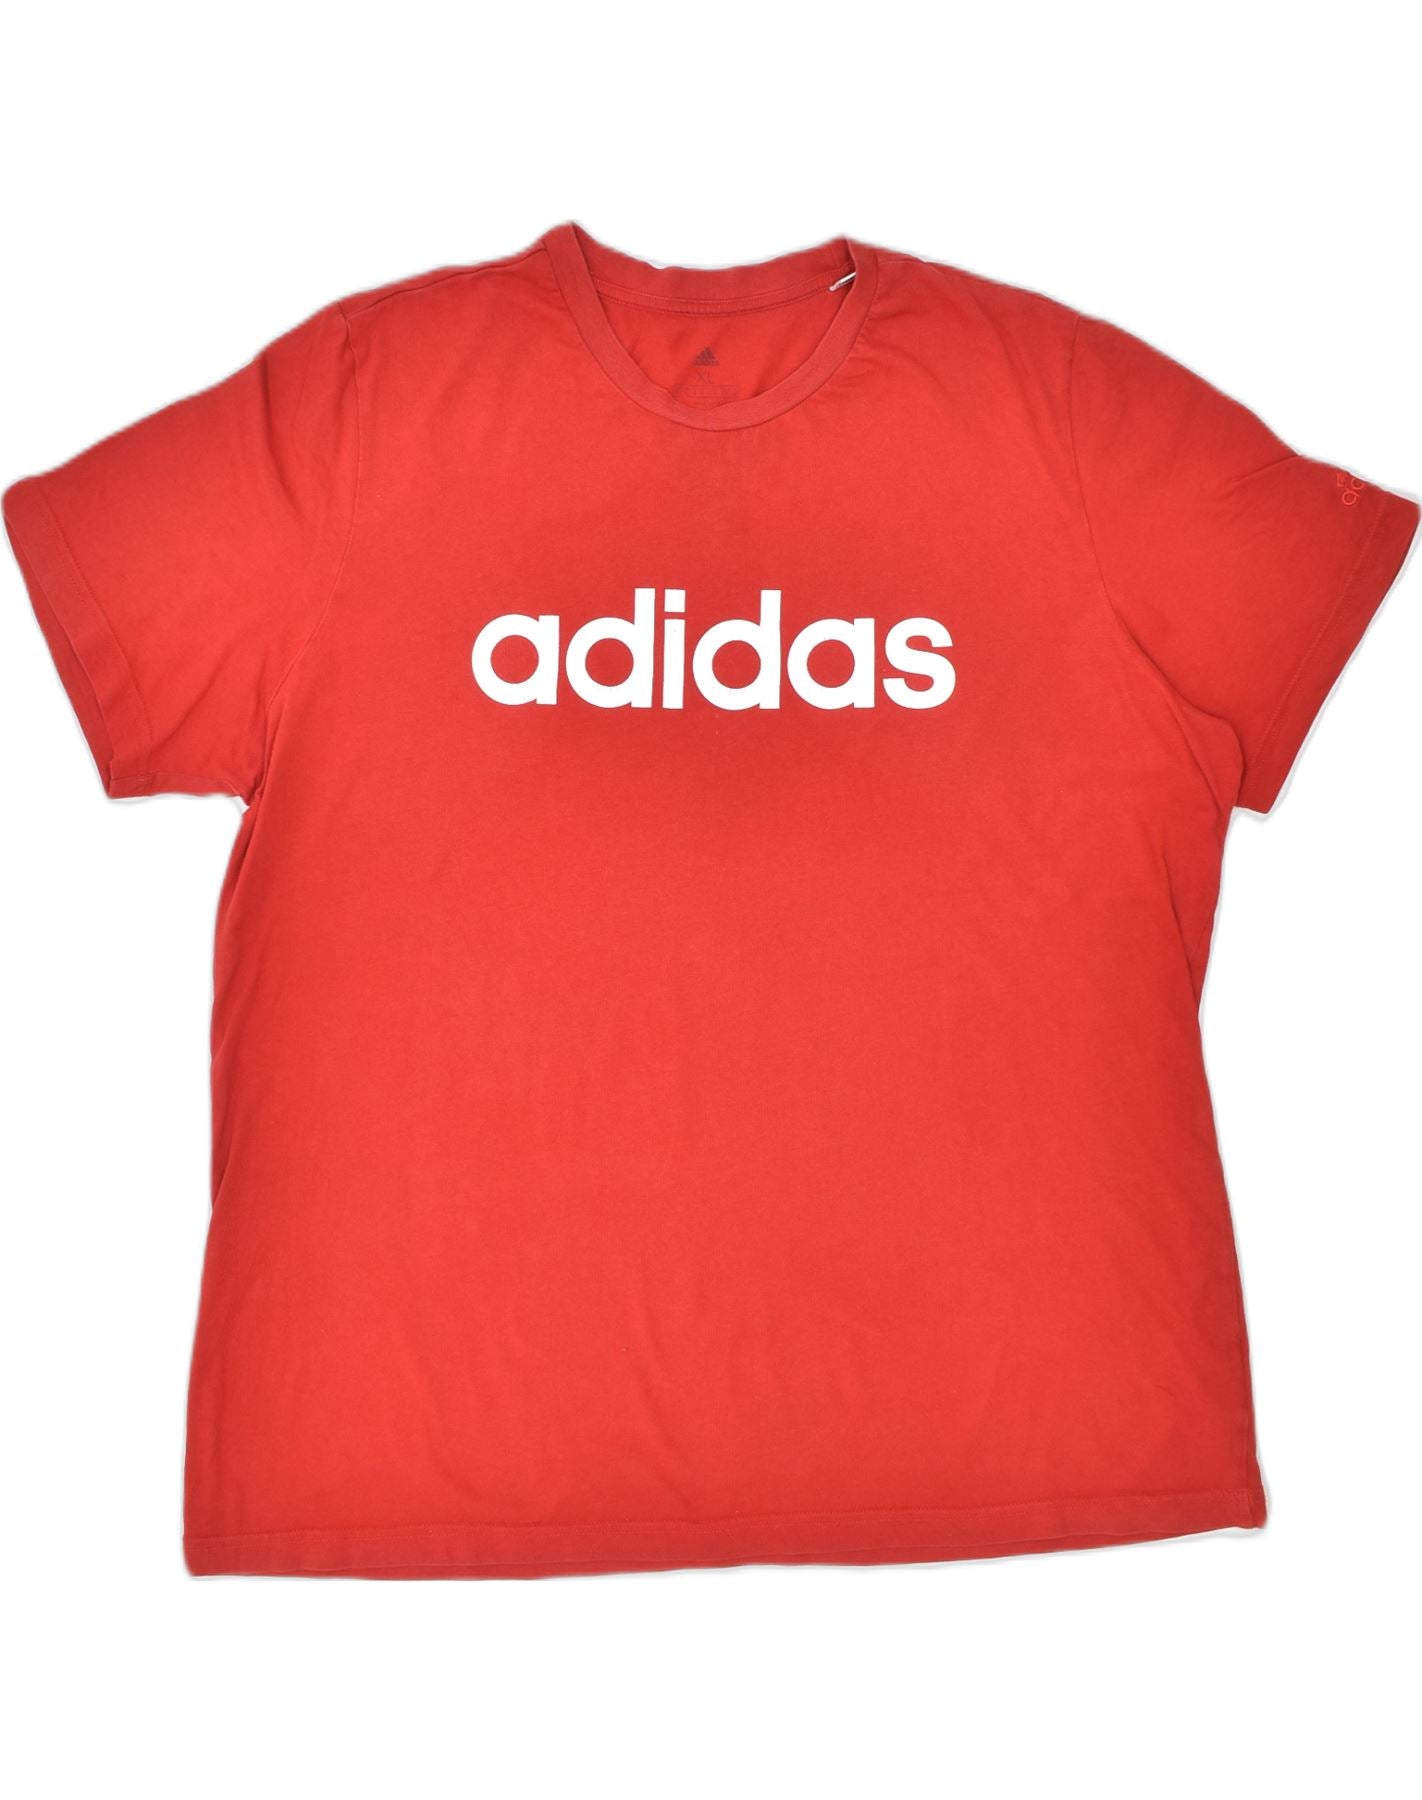 ADIDAS Homme Graphic T-Shirt Top XL Rouge Coton